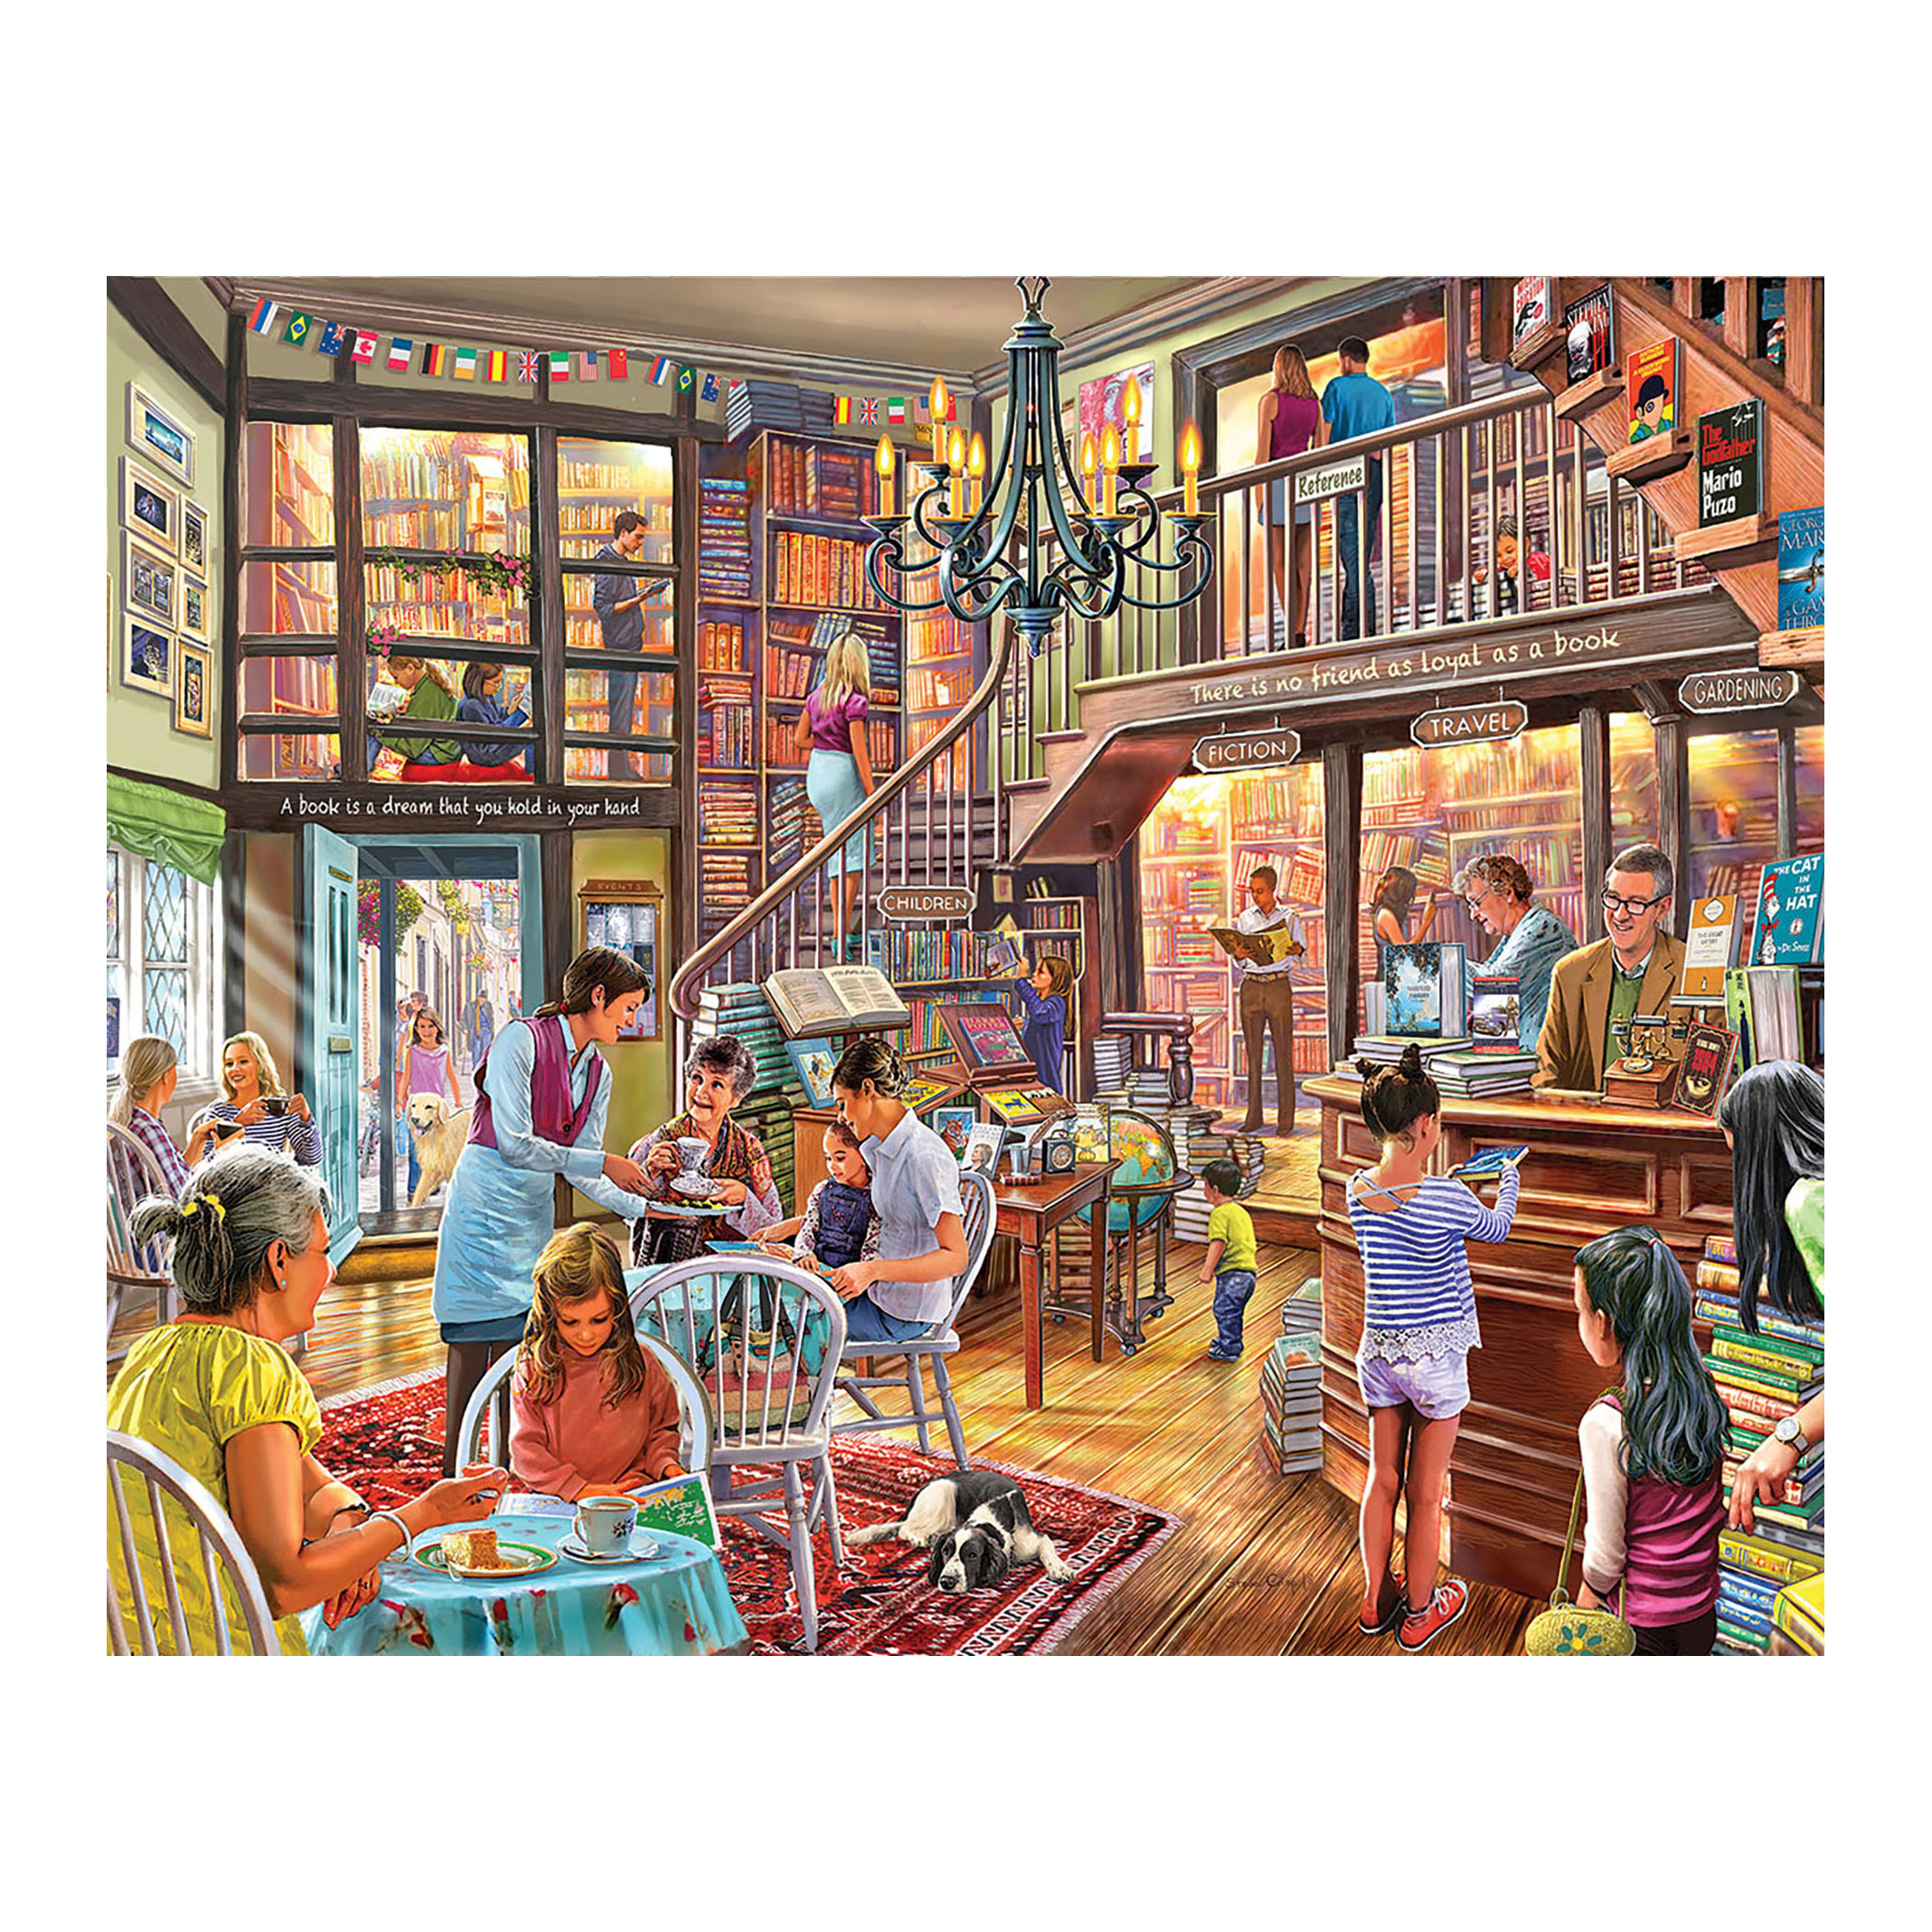 White Mountain Puzzles Local Book Store - 1000 Piece Jigsaw Puzzle - image 1 of 5